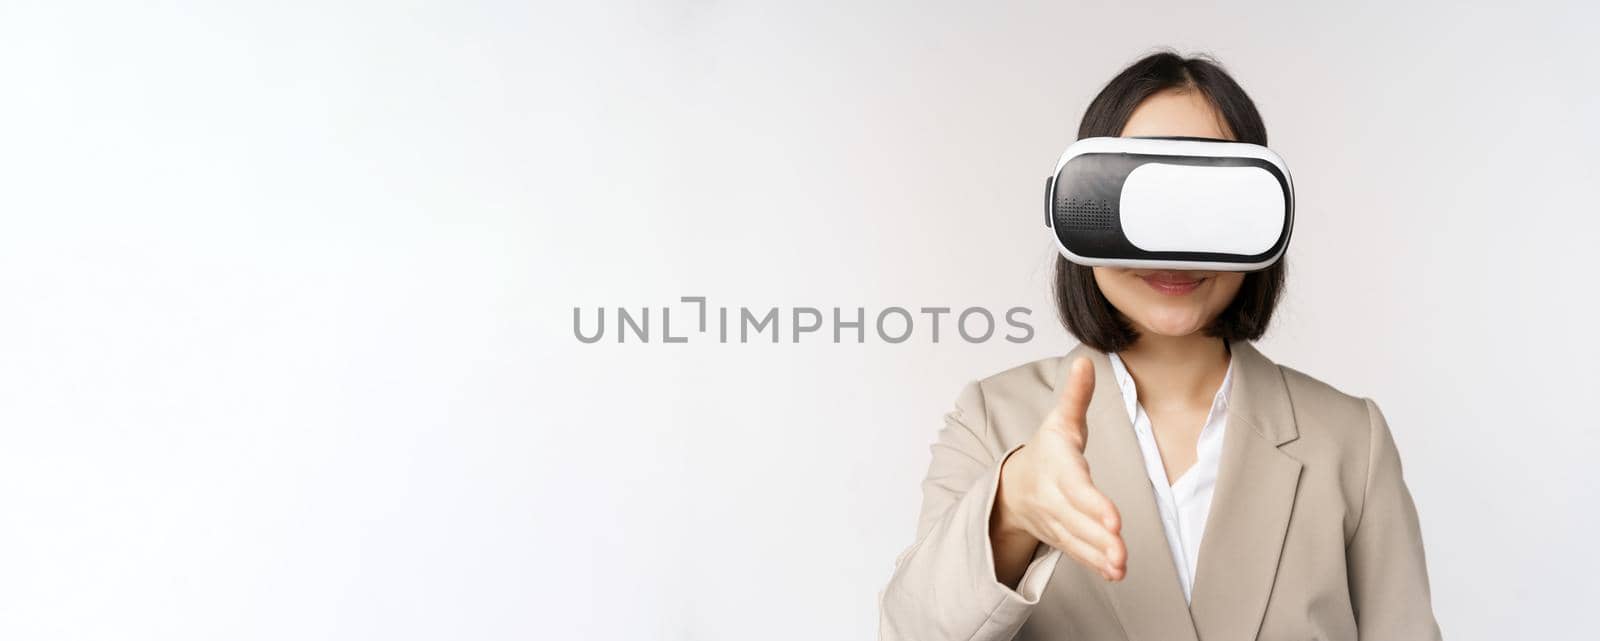 Meeting in vr chat. Asian businesswoman in virtual reality glasses, extending hand for handhshake with business partner, greeting someone, standing over white background.